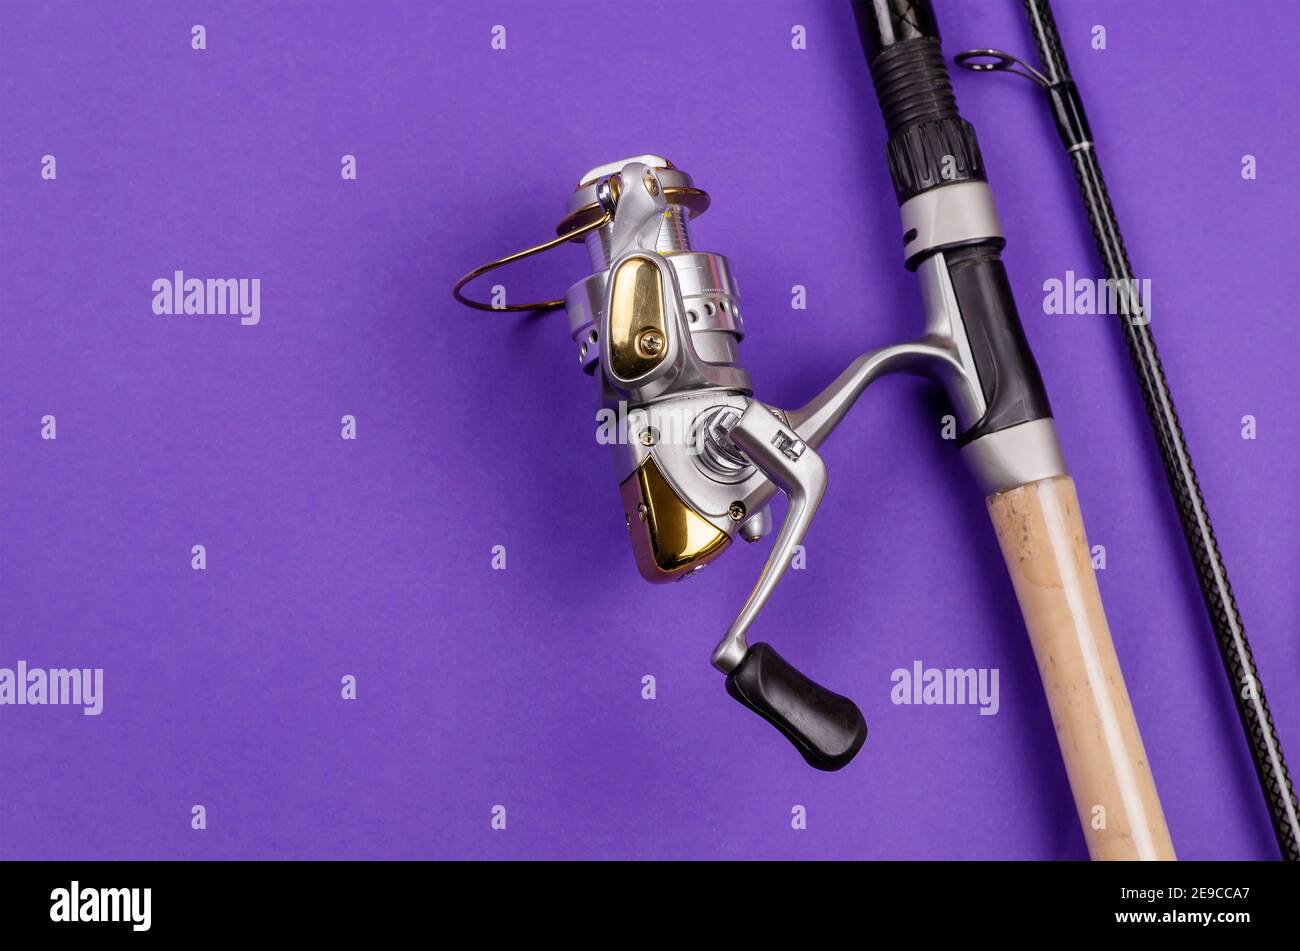 Fishing rod with attached fly fishing reel on blue background